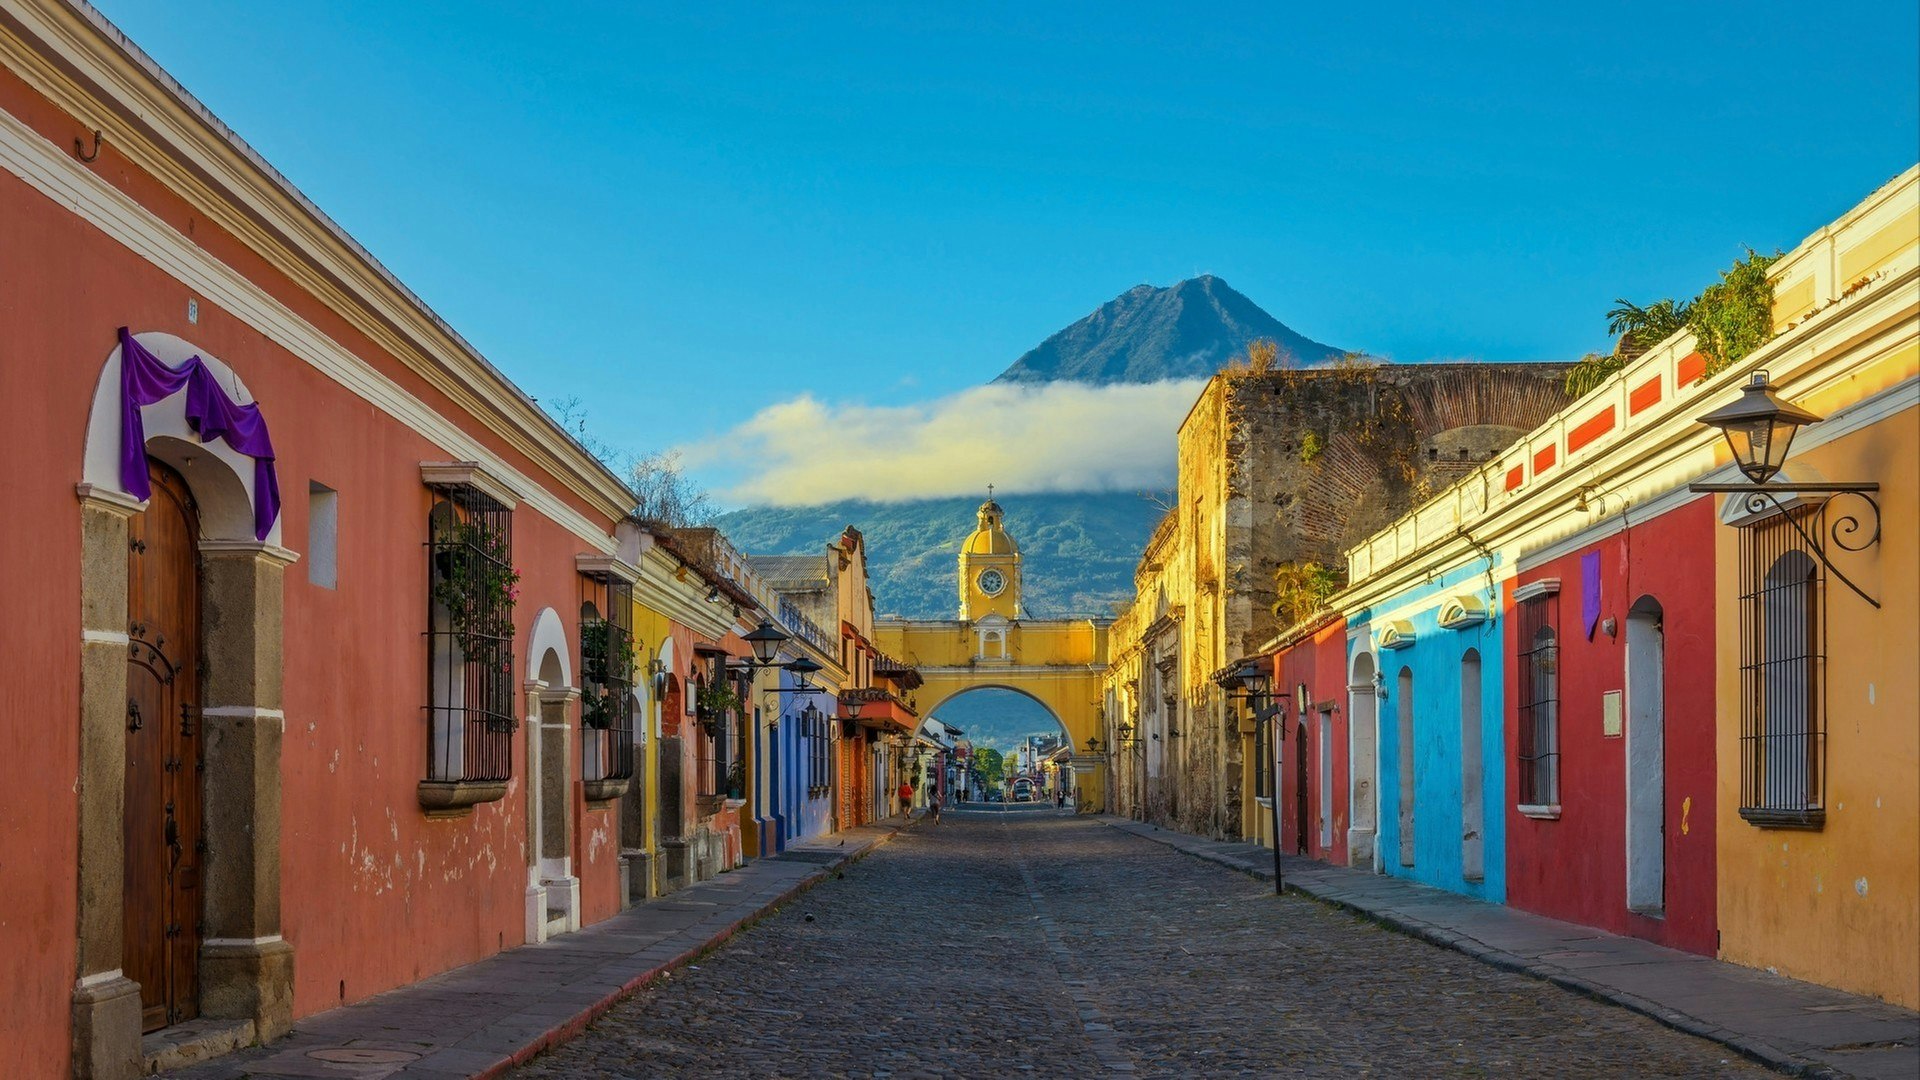 Antigua city with the Agua volcano in the background, Guatemala